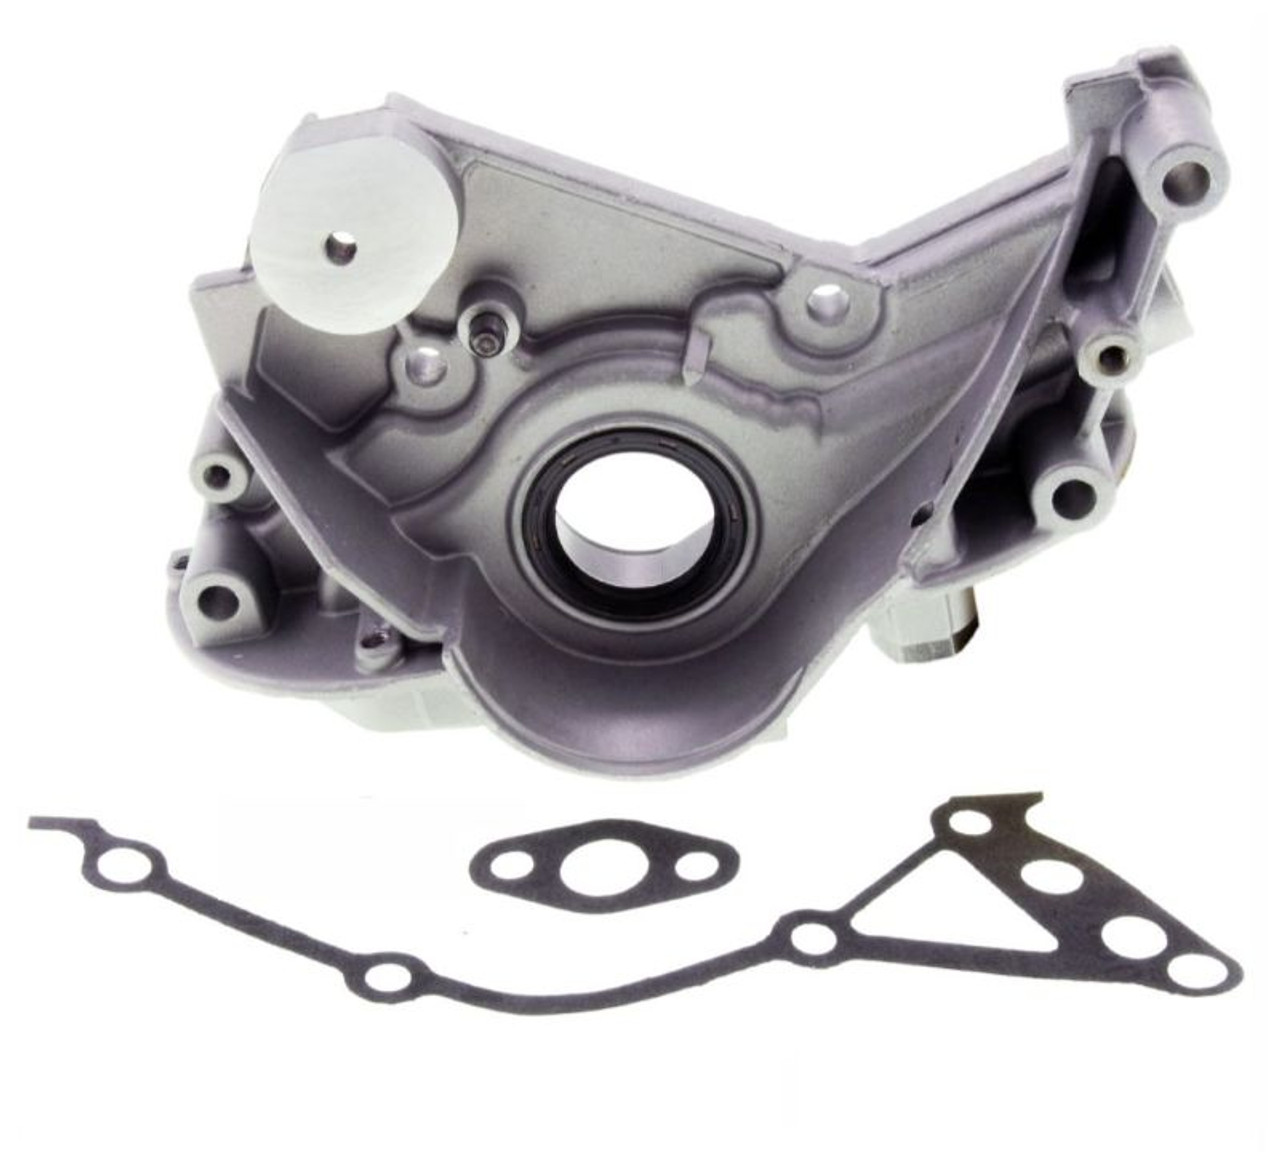 Oil Pump - 1998 Plymouth Grand Voyager 3.0L (EPK129.I87)